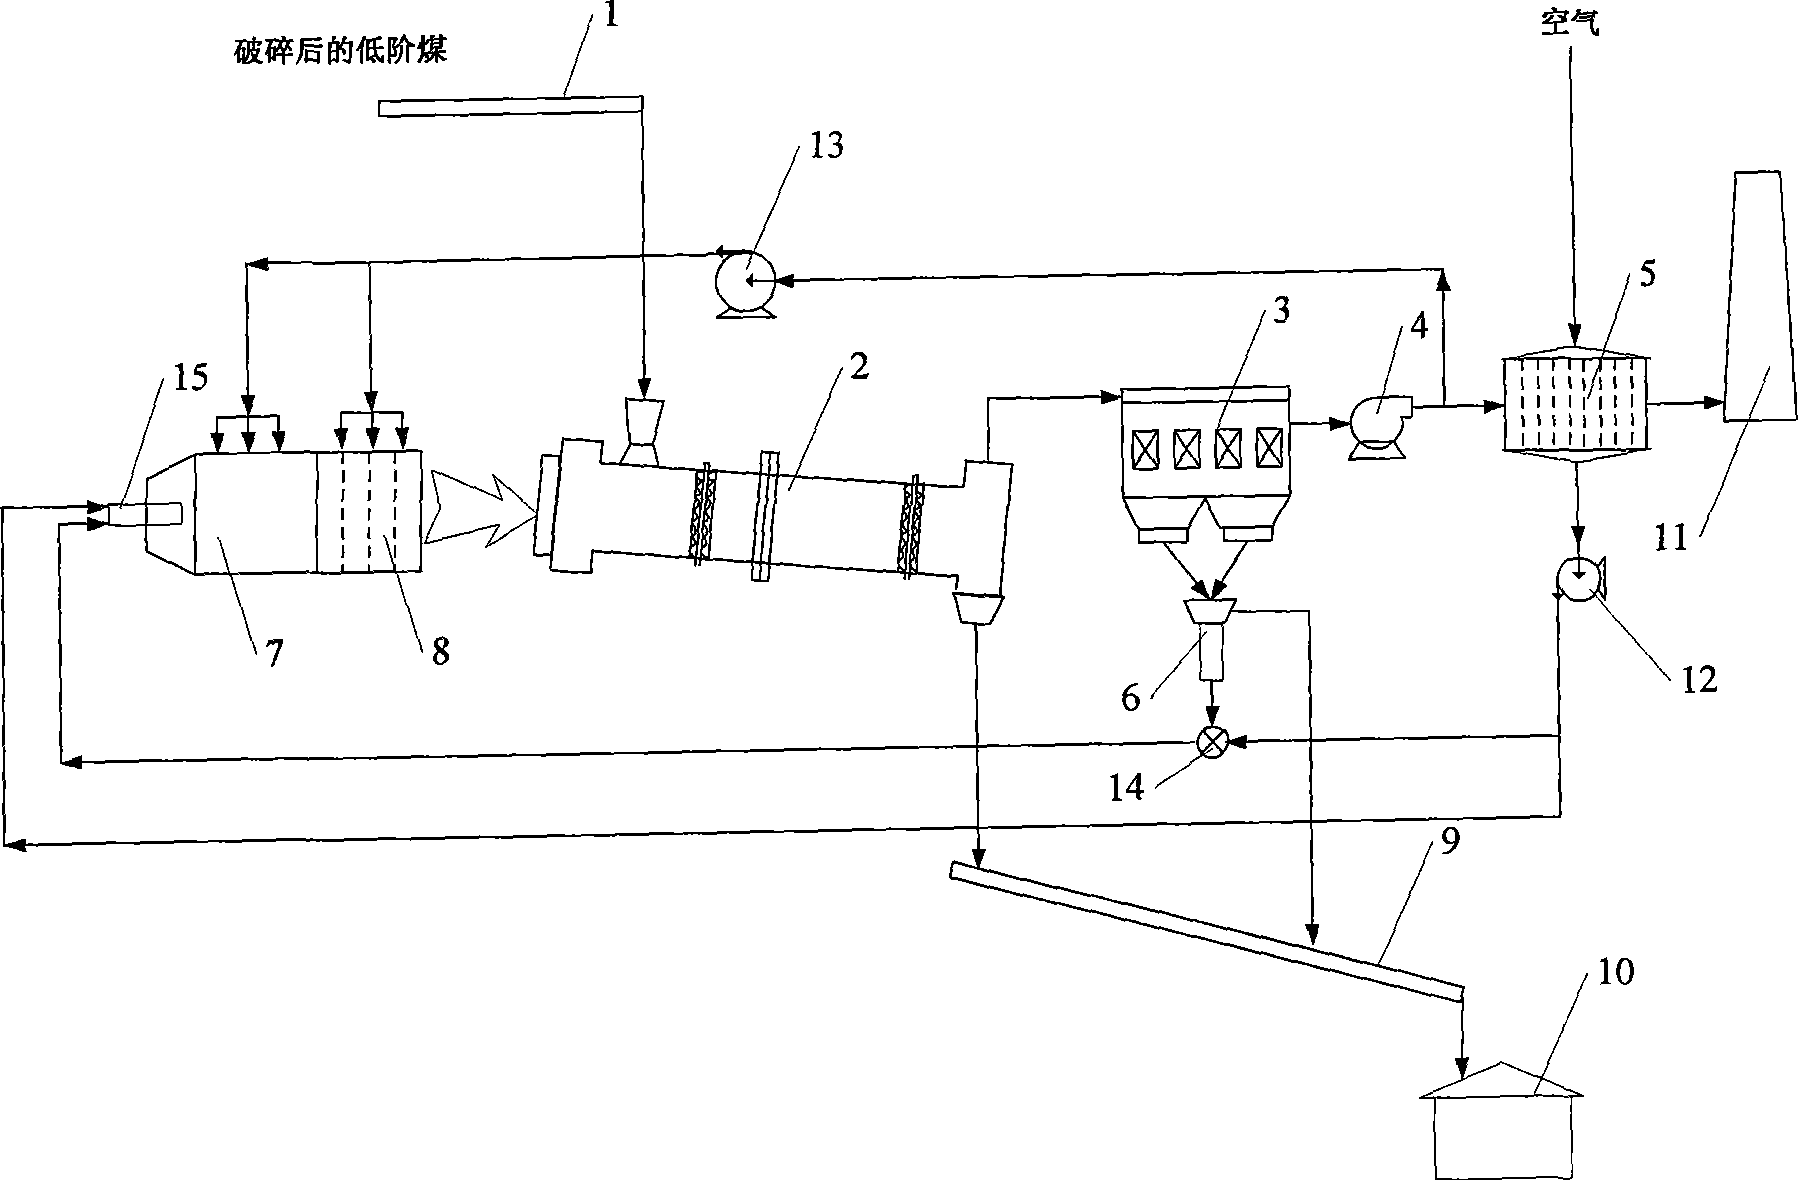 Low-rank coal drying method and system